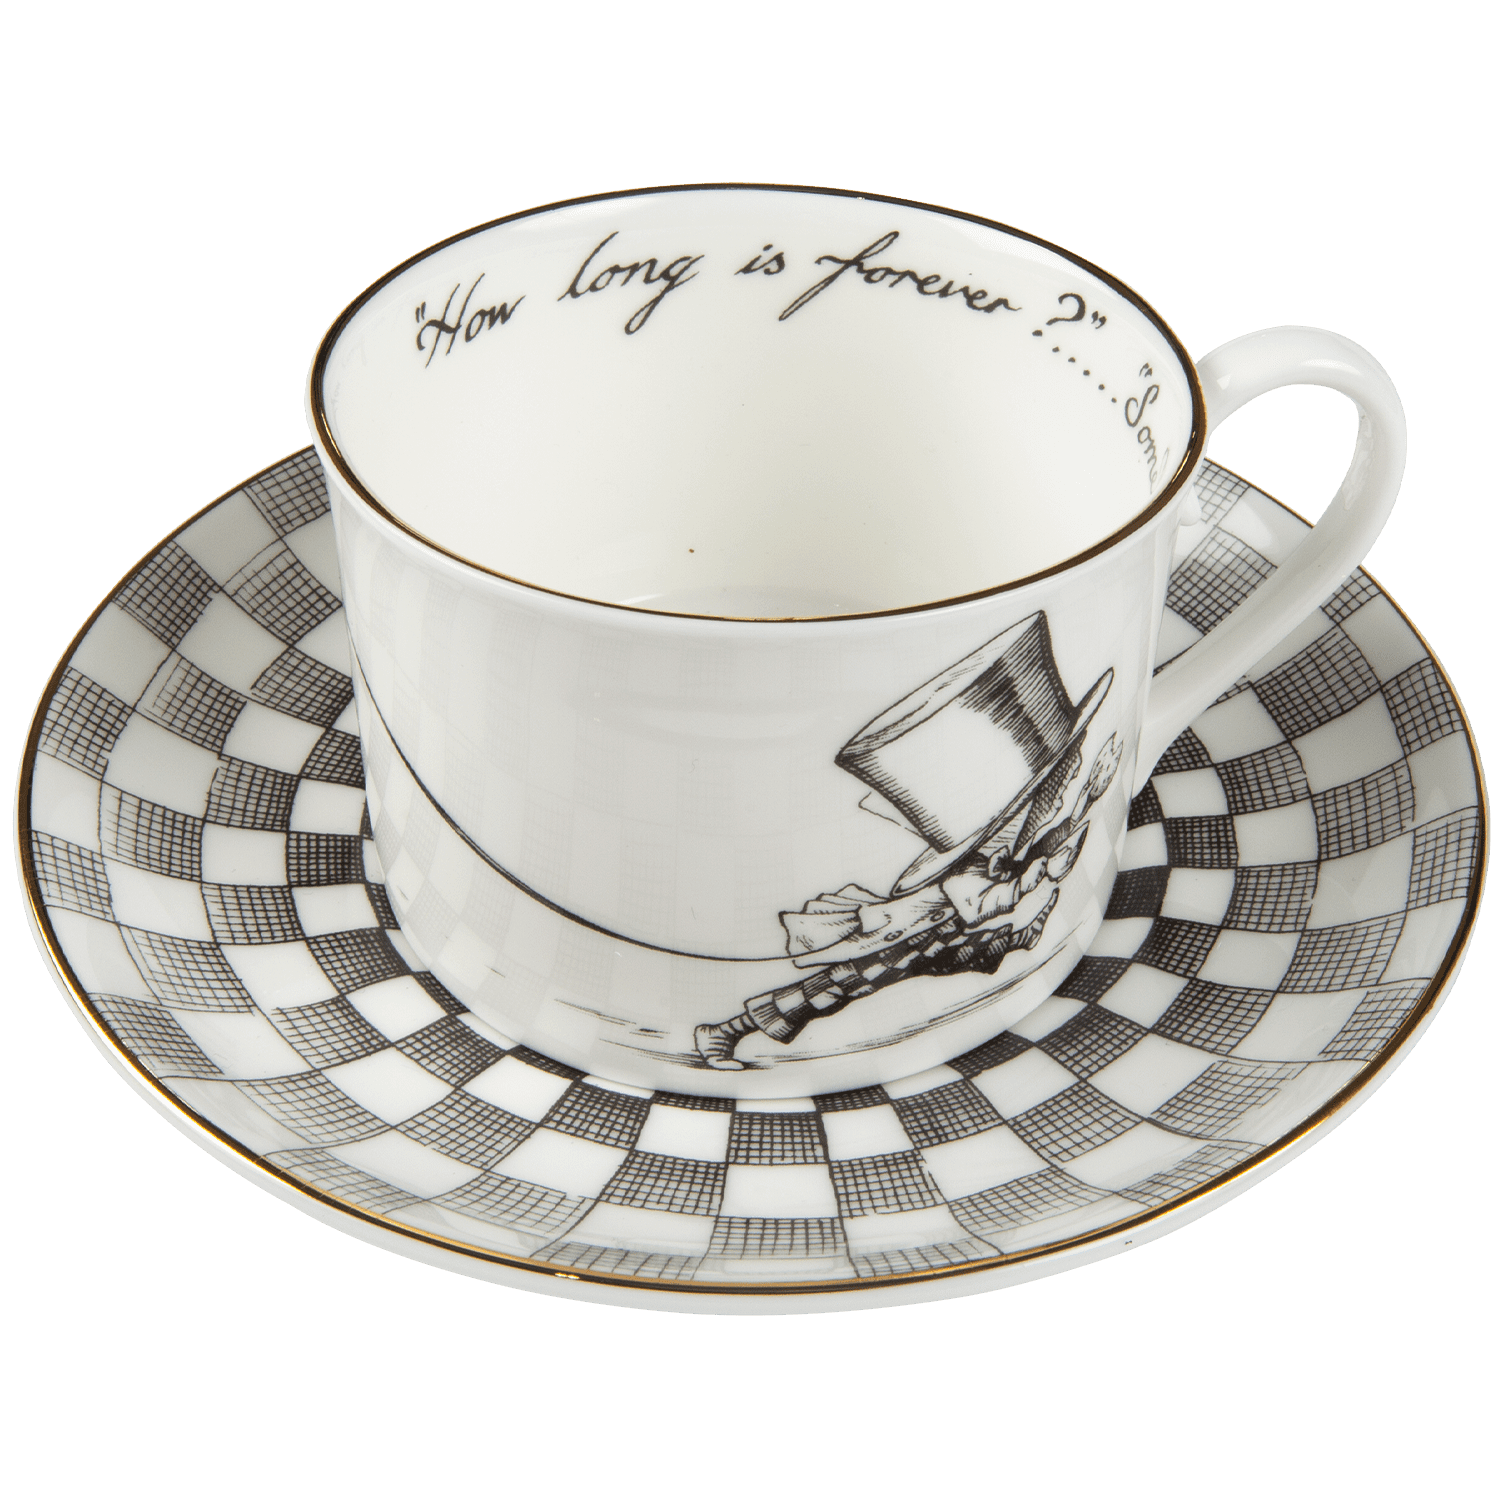 Alice in Wonderland Teapot Cup and Saucer – MaryRoseYoung